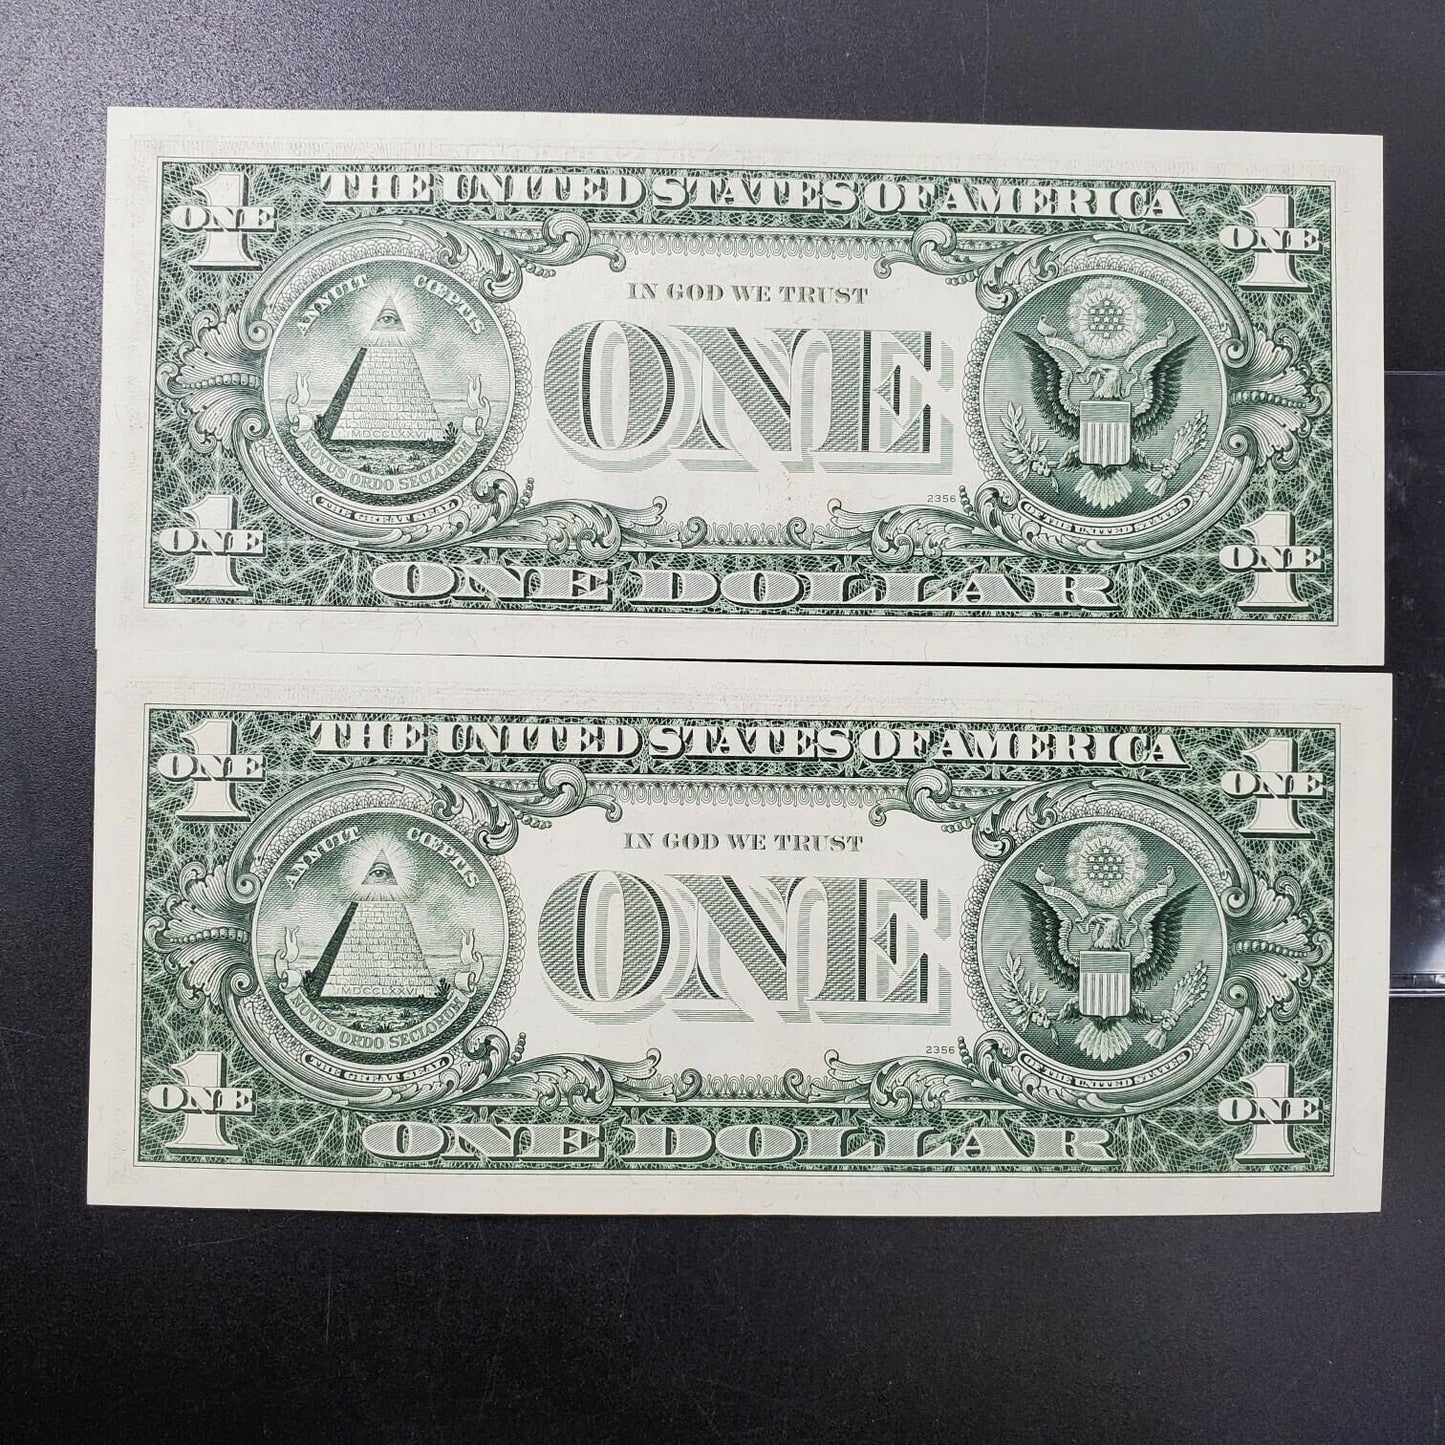 Consecutive Pair 2 1977 $1 FRN Federal Reserve Note Green Seal Low Serial #s UNC